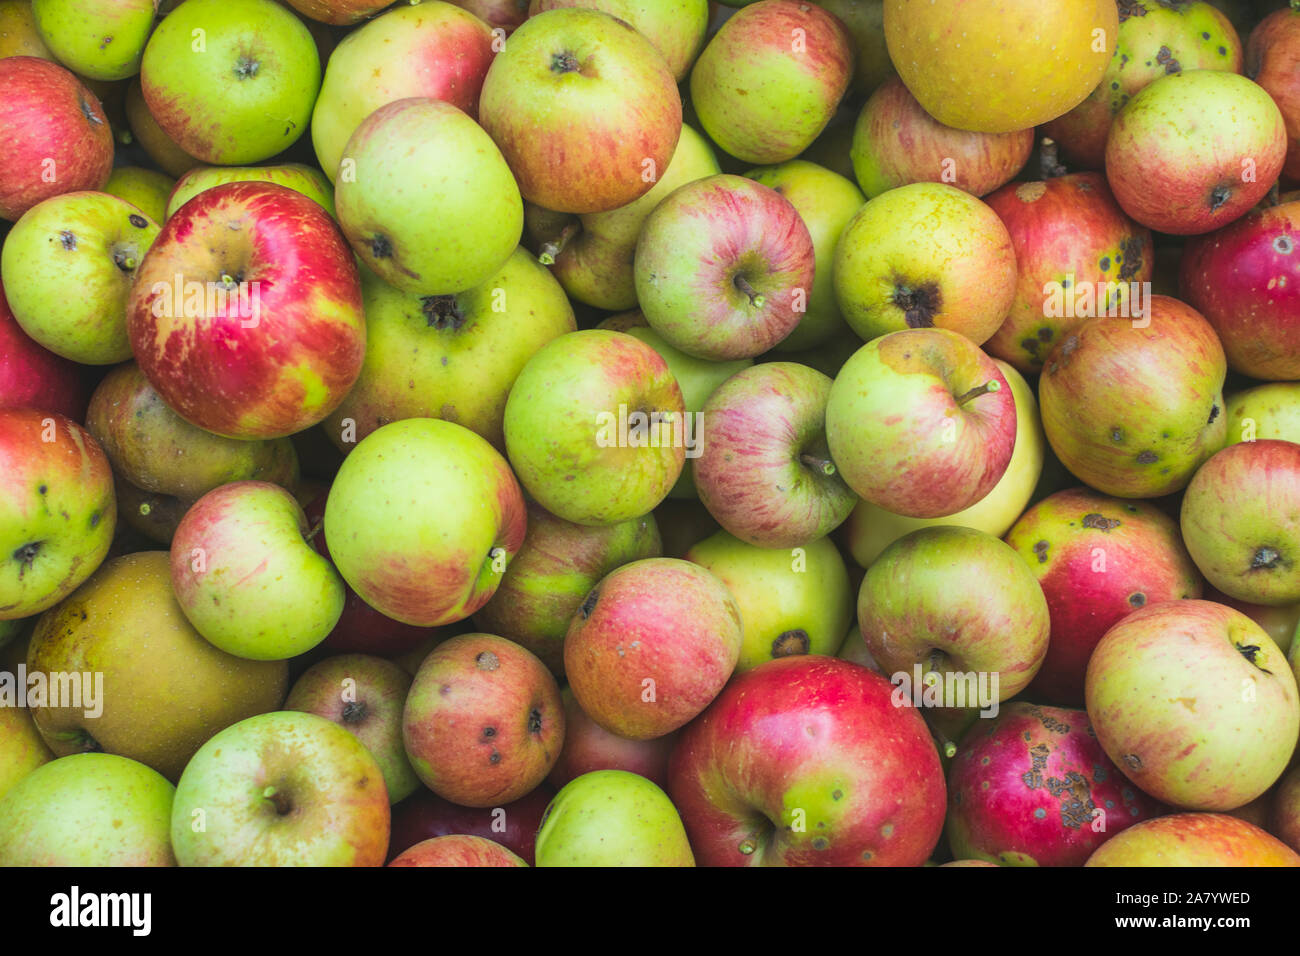 Colorful and freshly picked apples . Full frame photography. Stock Photo